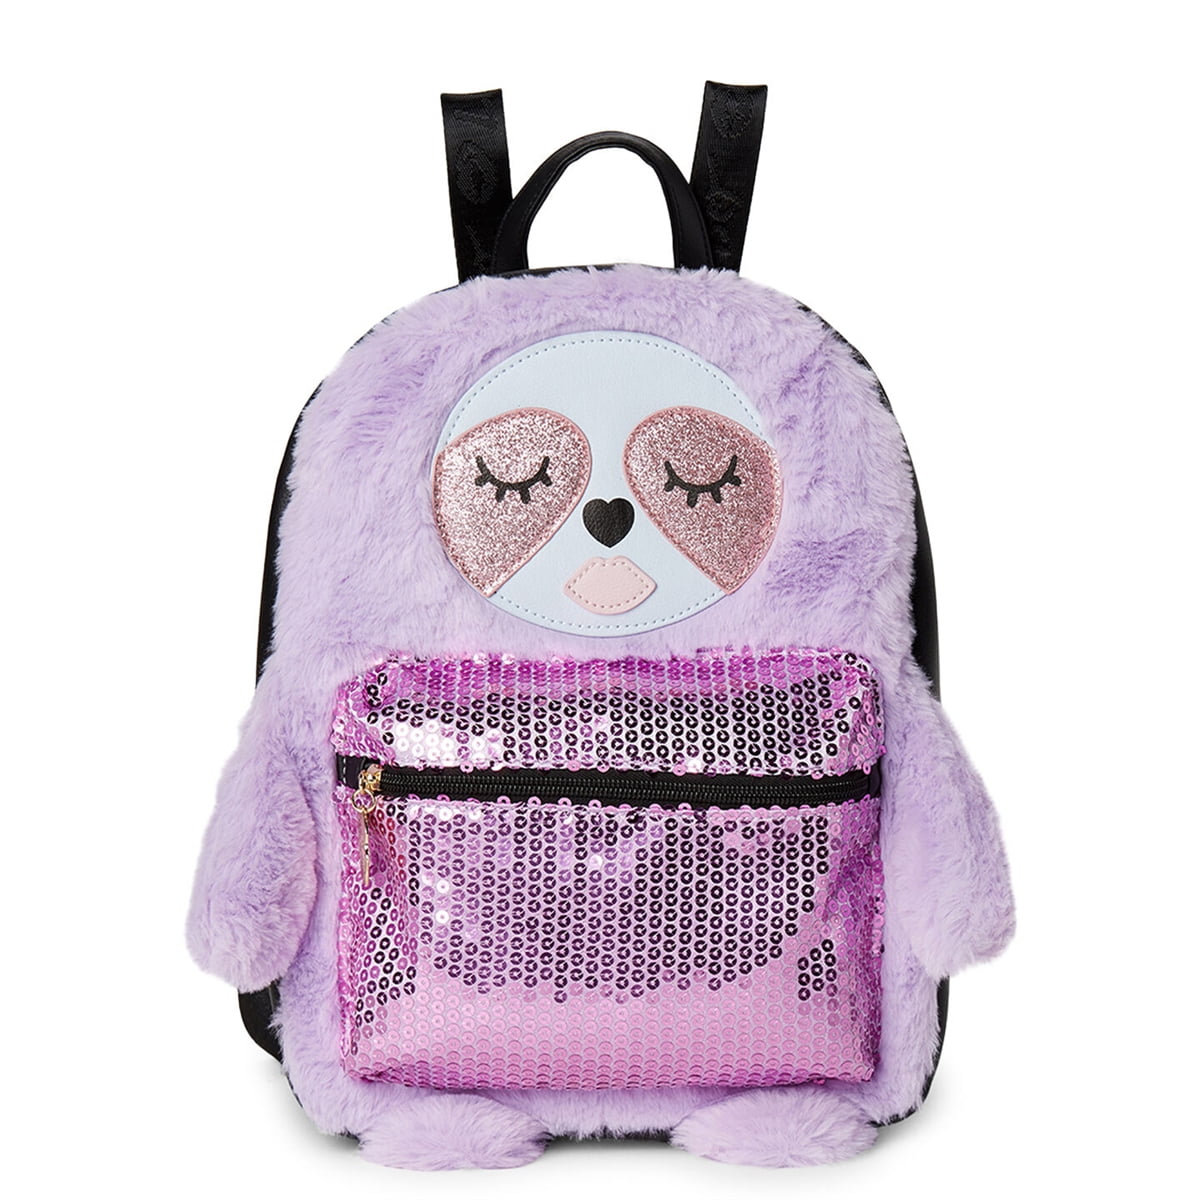 Adults Business Backpack Computer Shoulders Bag Travel Daypack WAY.MAY I Love Sloths